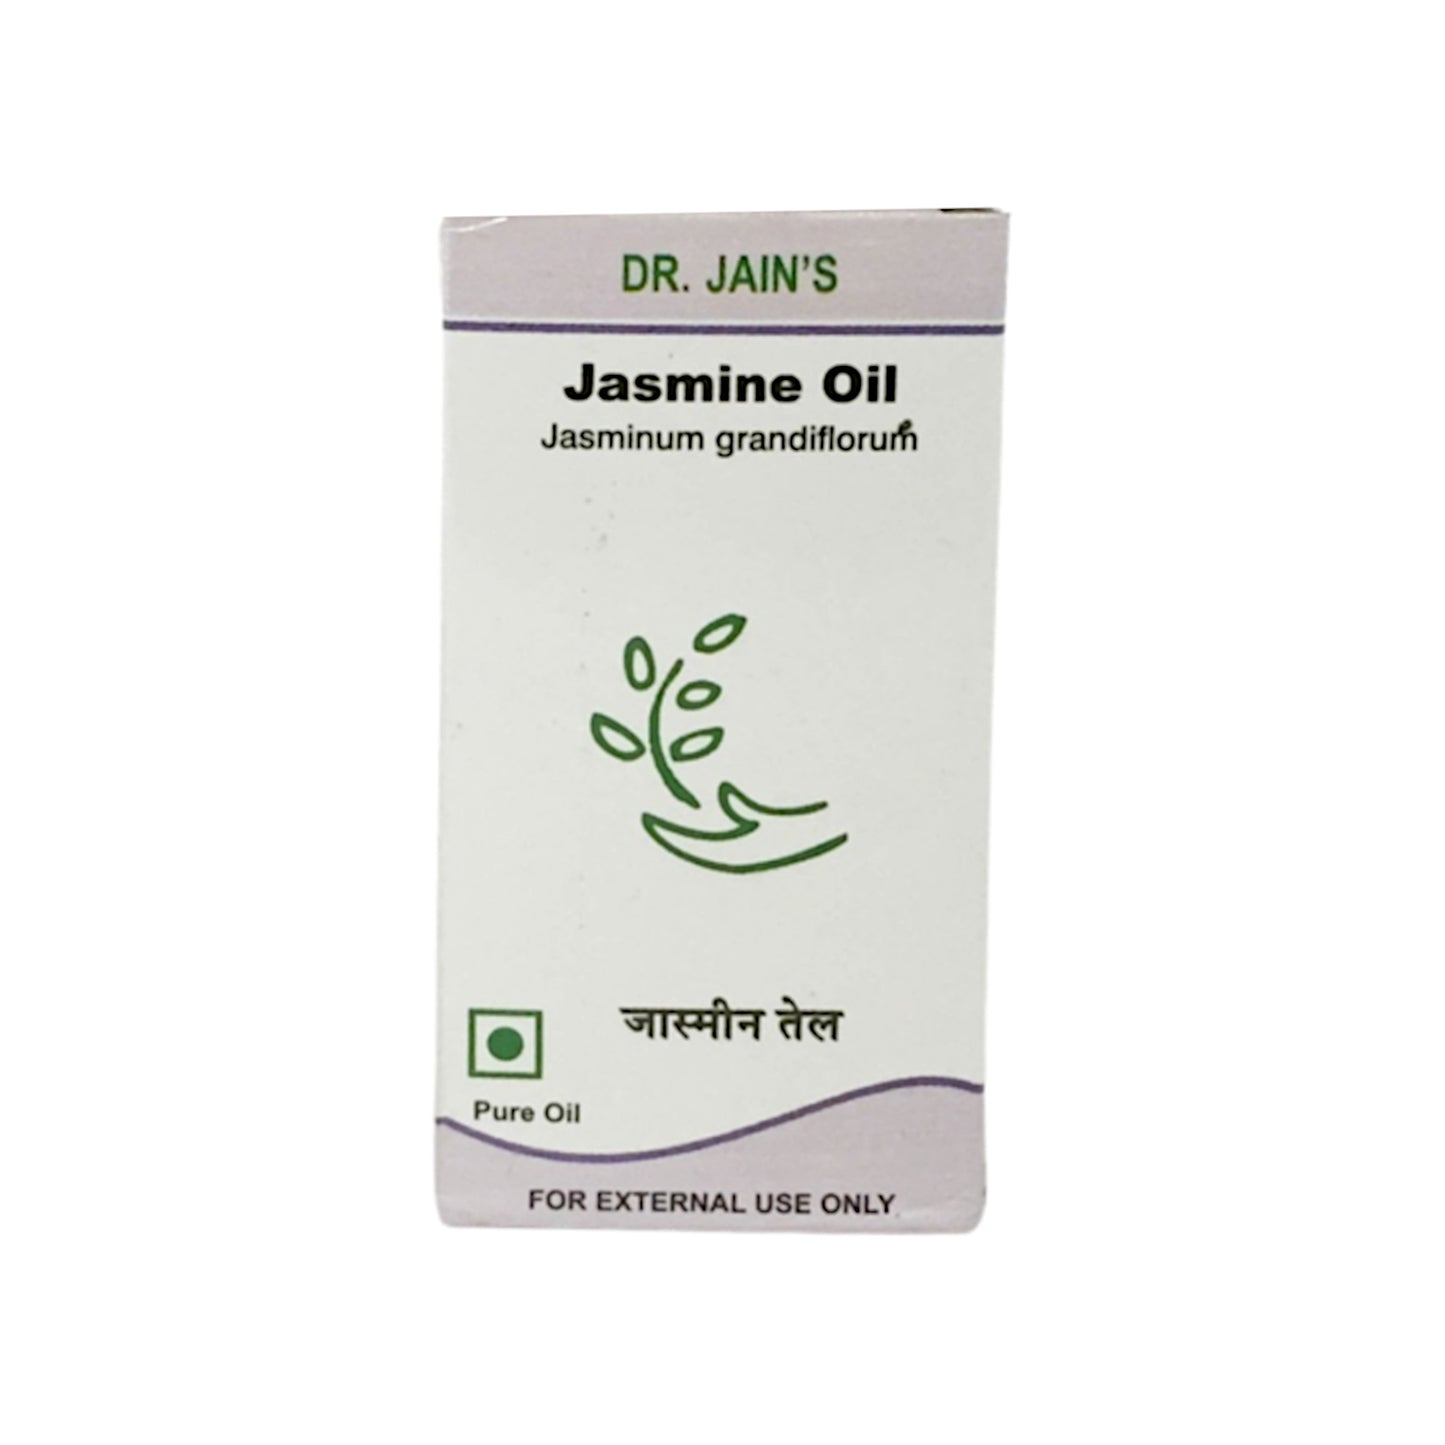 Image for Dr. Jain's Jasmine Oil - 5 ml. Offers skin benefits, aids in childbirth, and has therapeutic properties.